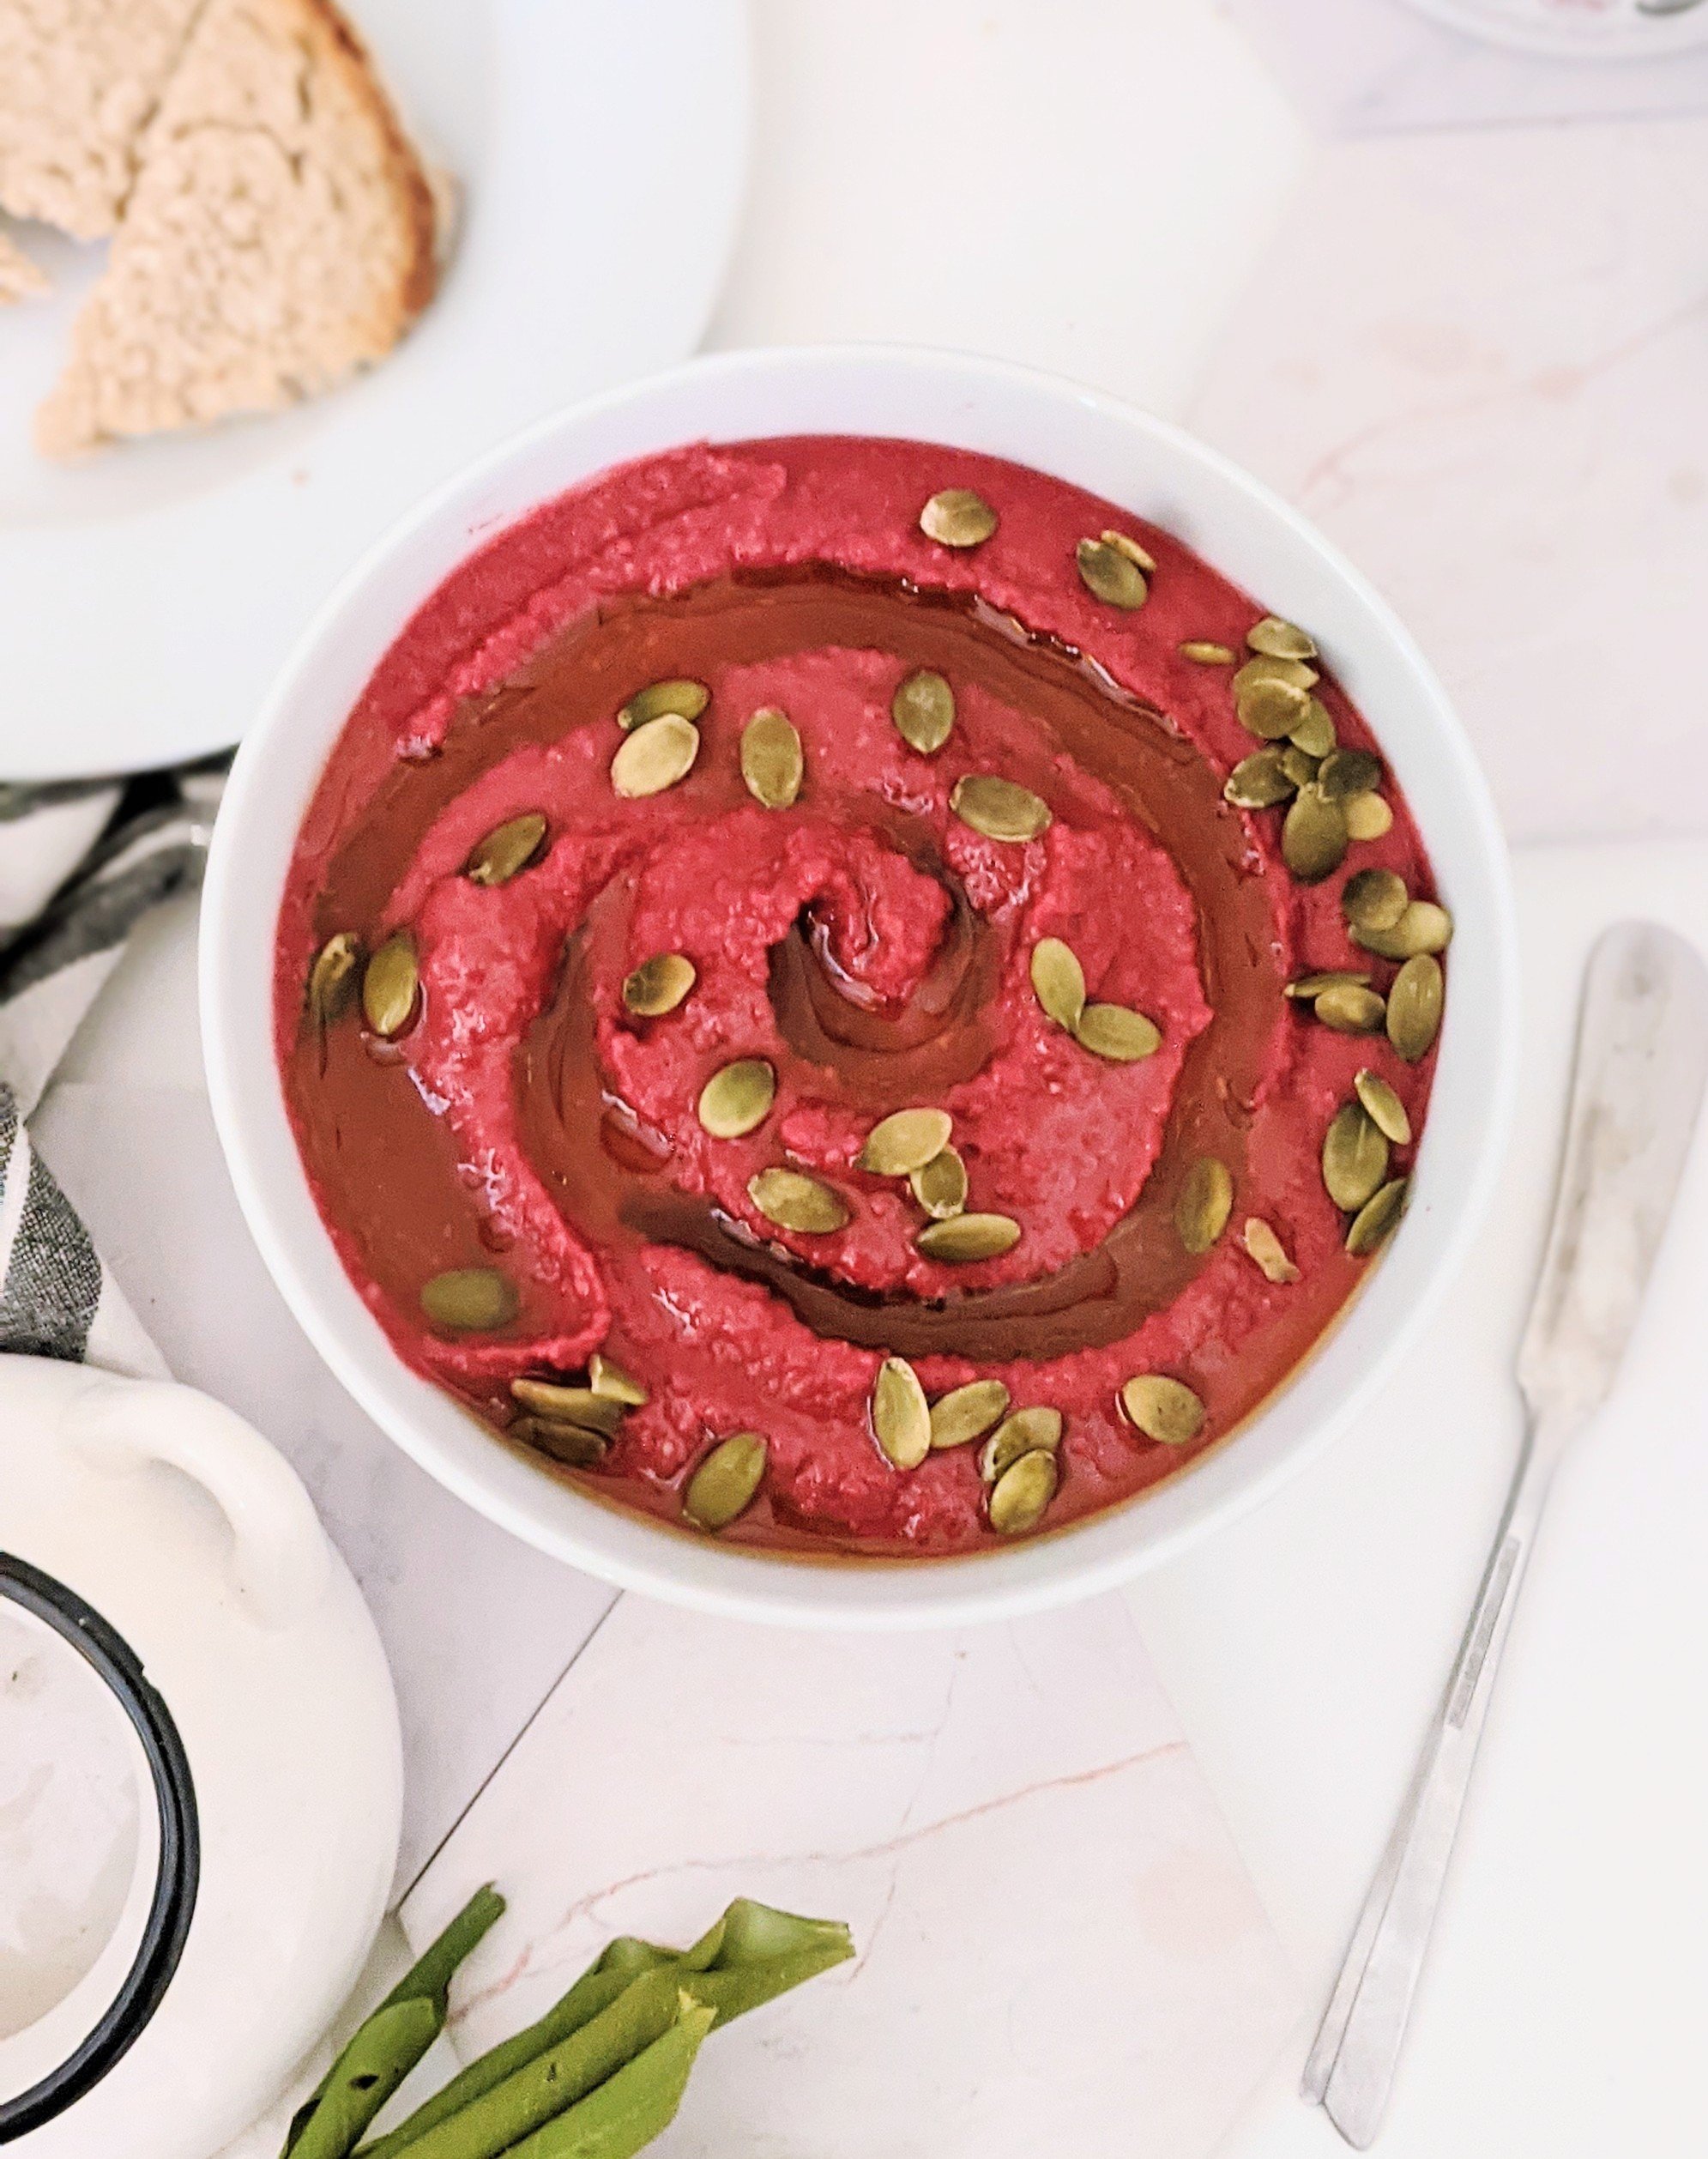 beet powder hummus recipe made with beetrood powder healthy is beet hummus good for you recipe plant based vegan gluten free high protein snacks or appetizers dip